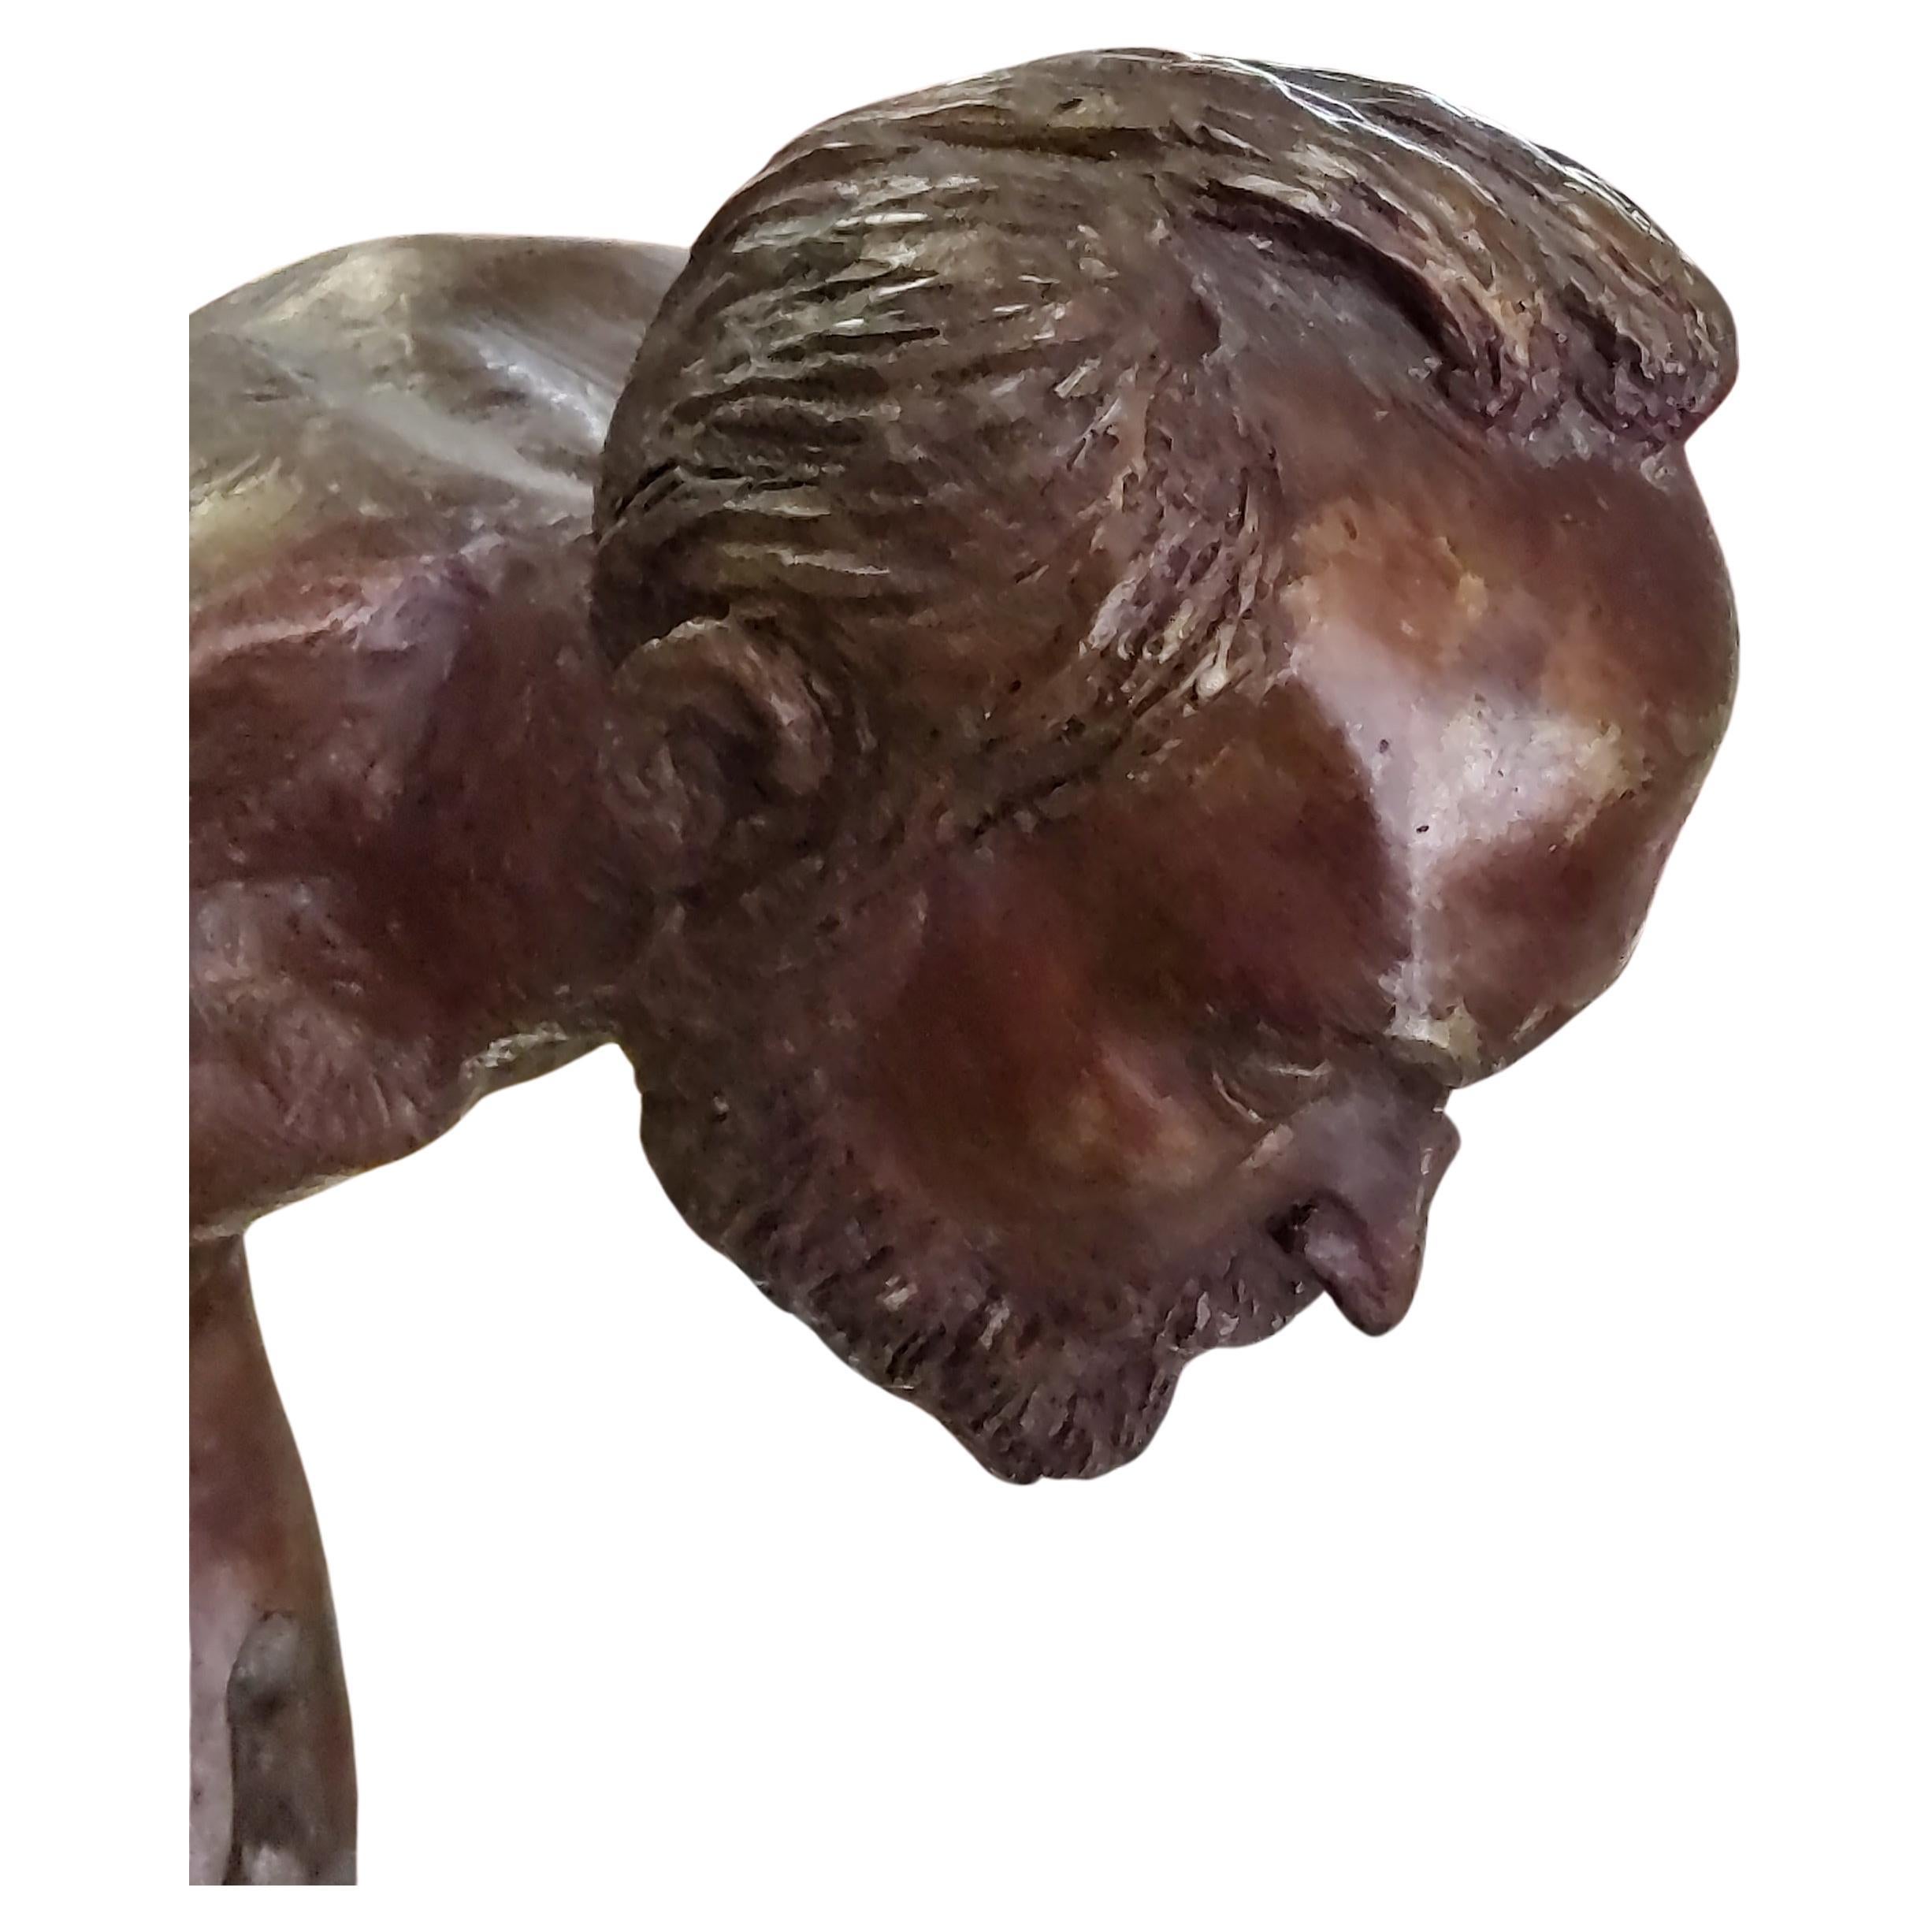 American Mid Century Bronze Sculpture of a Man by Michael Shacham 